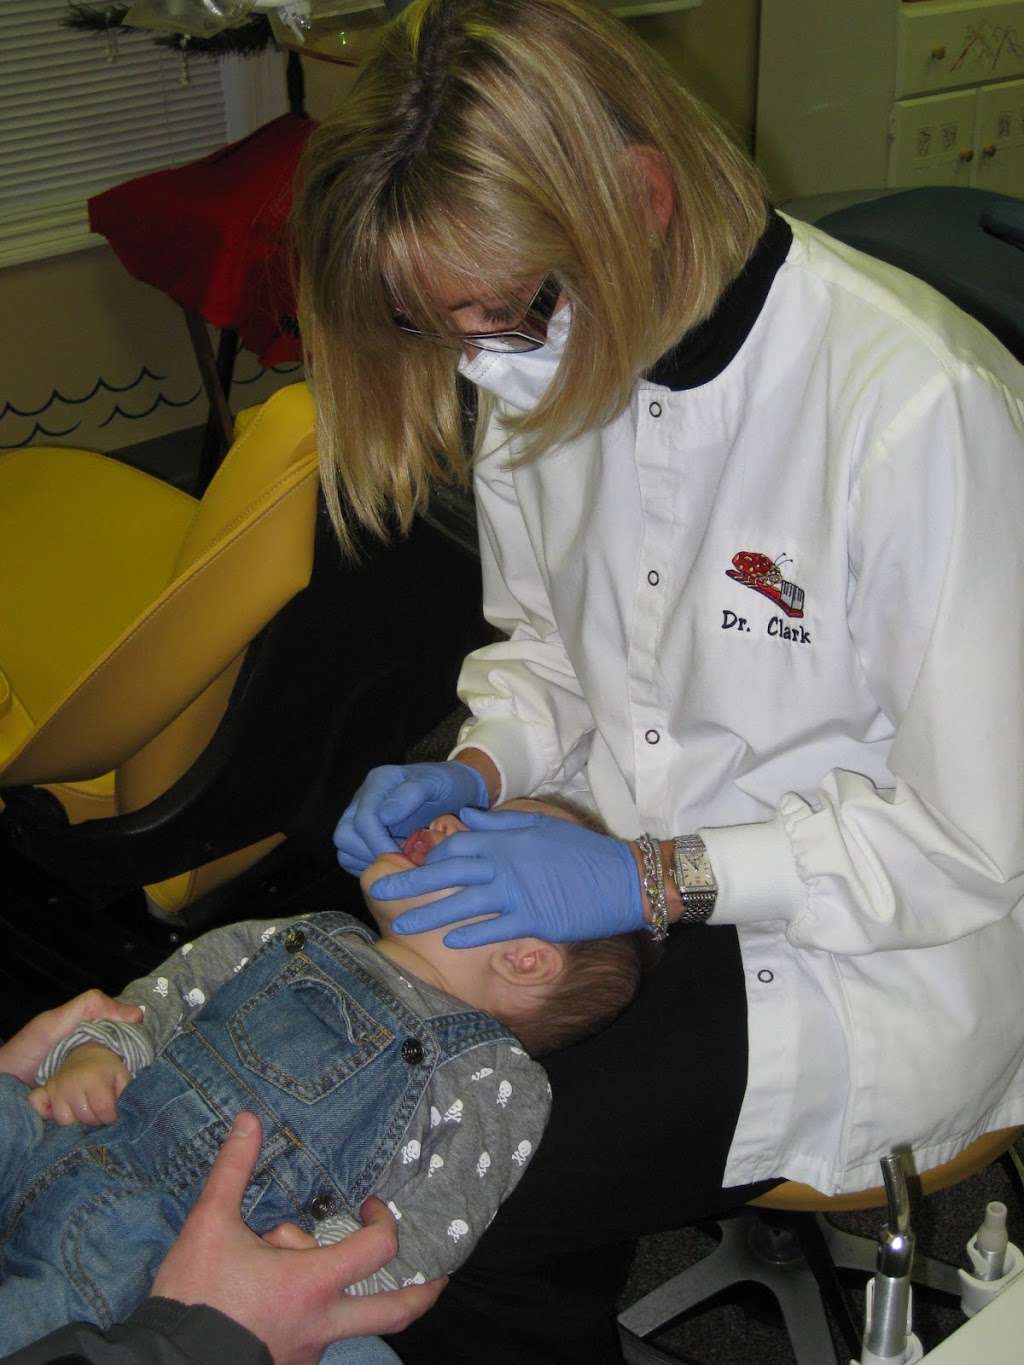 Clark, Dean & Associates Childrens Dentistry | 7830 Rockville Rd A, Indianapolis, IN 46214 | Phone: (317) 271-9727